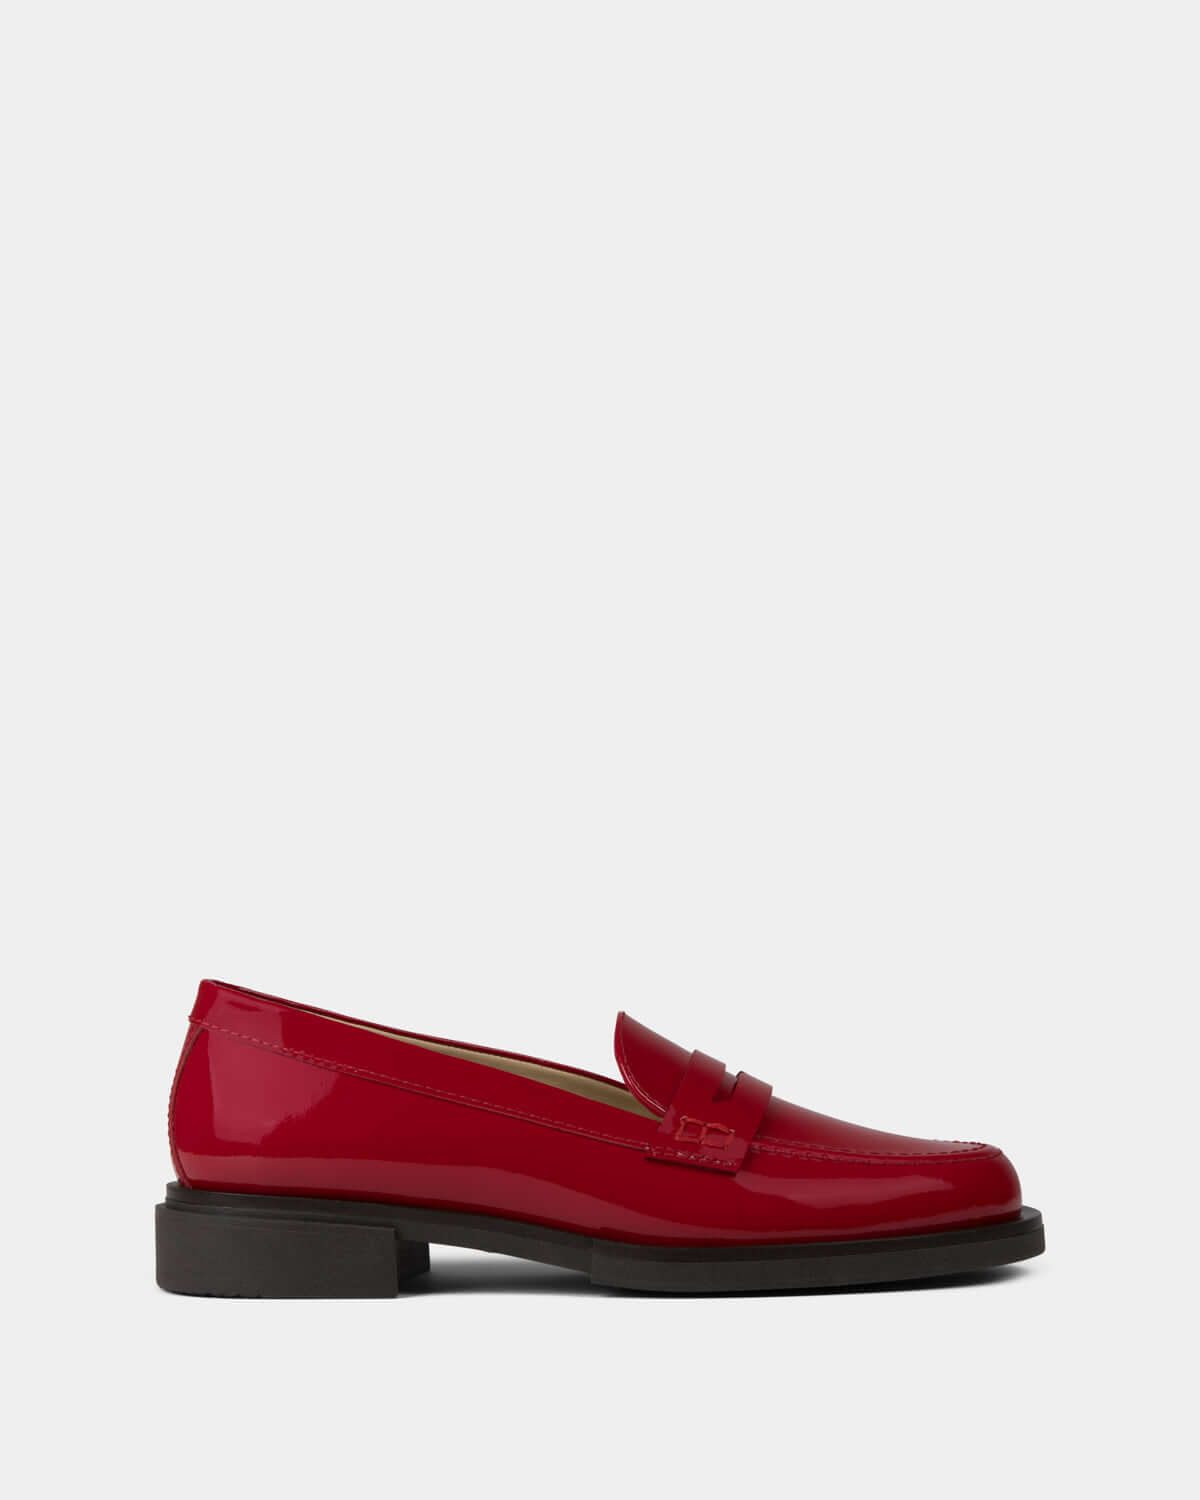 kallu-kallú-red-patent-leather-loafers-for-women-made-in-spain-loafers-moccasins